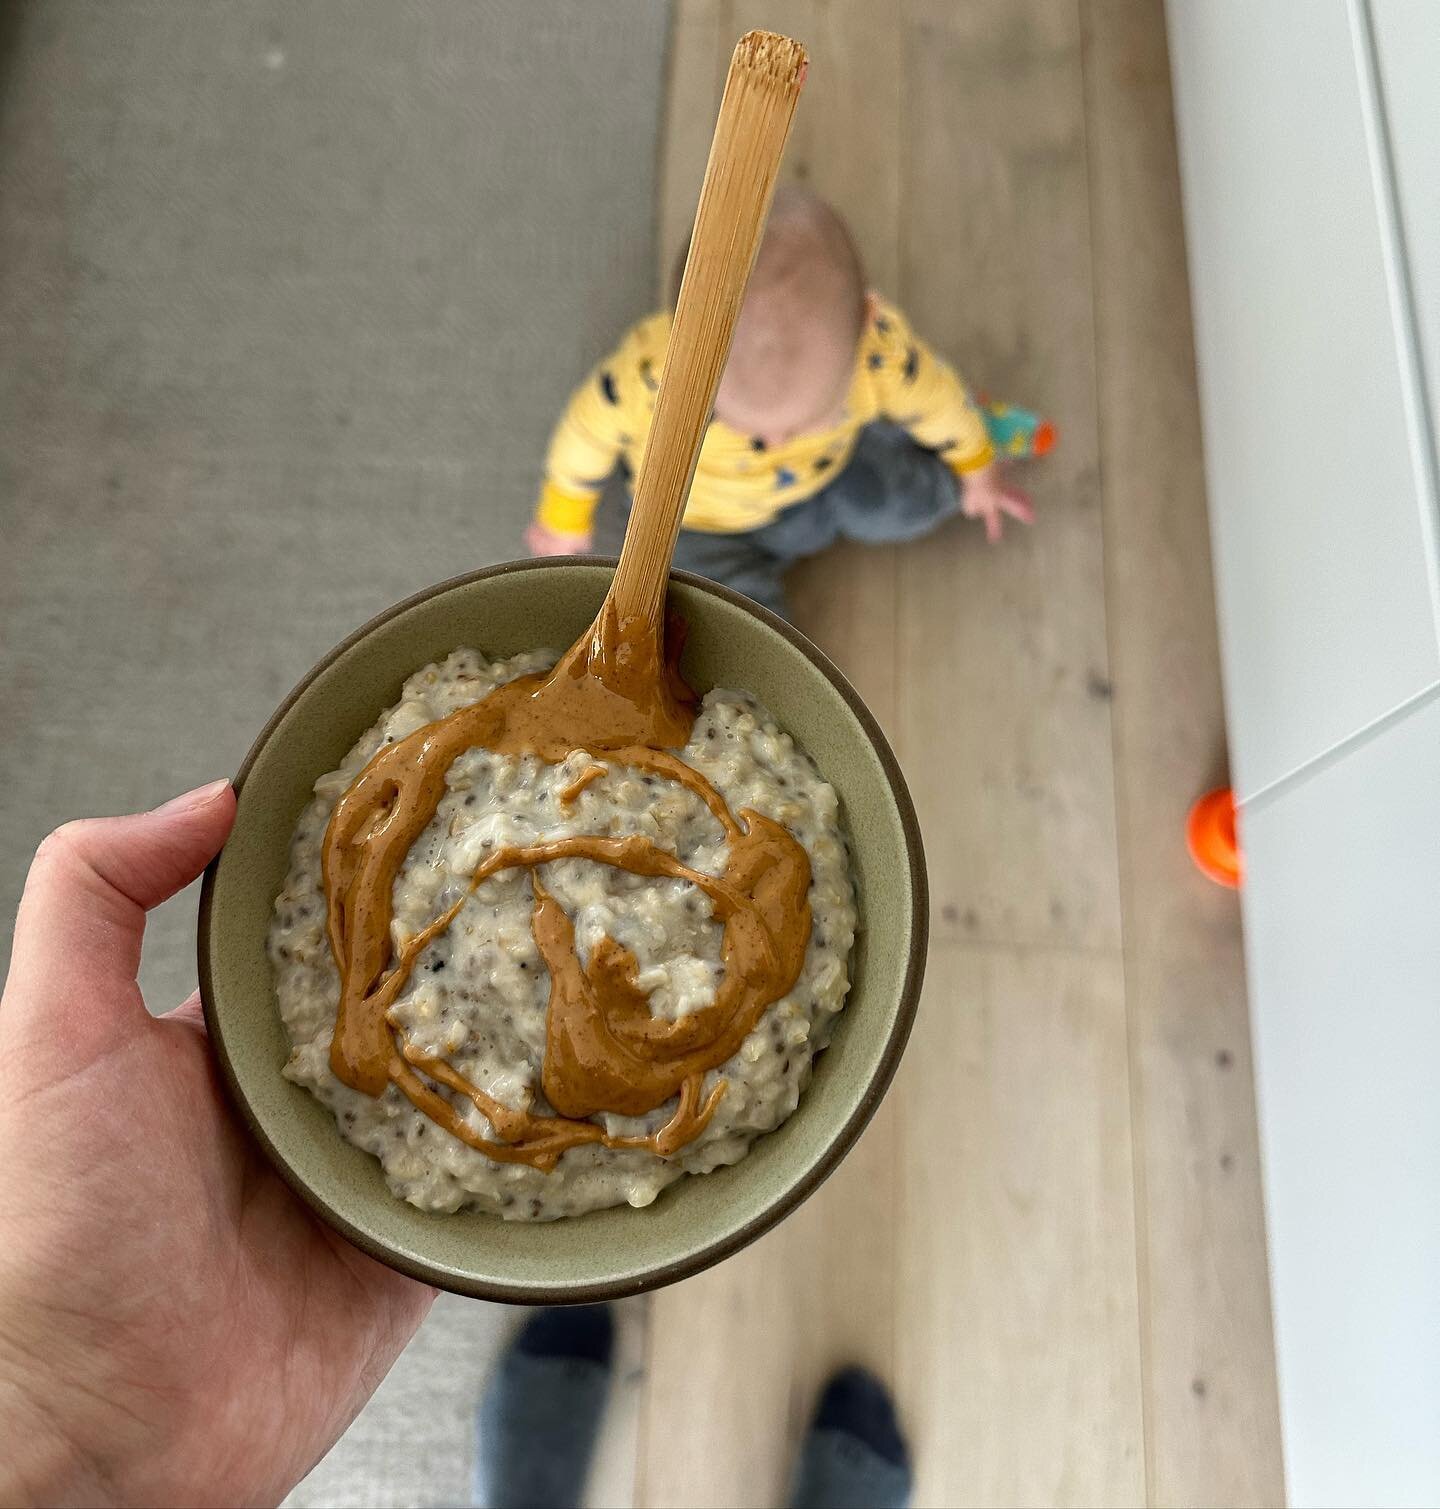 Steel cut oats with Chia, protein powder, cinnamon, coconut butter, whole milk, a drizzle of creamy peanut butter, and a whole lot of Levi cuteness. #breakfastwithlevi #steelcut #oats #postpartum